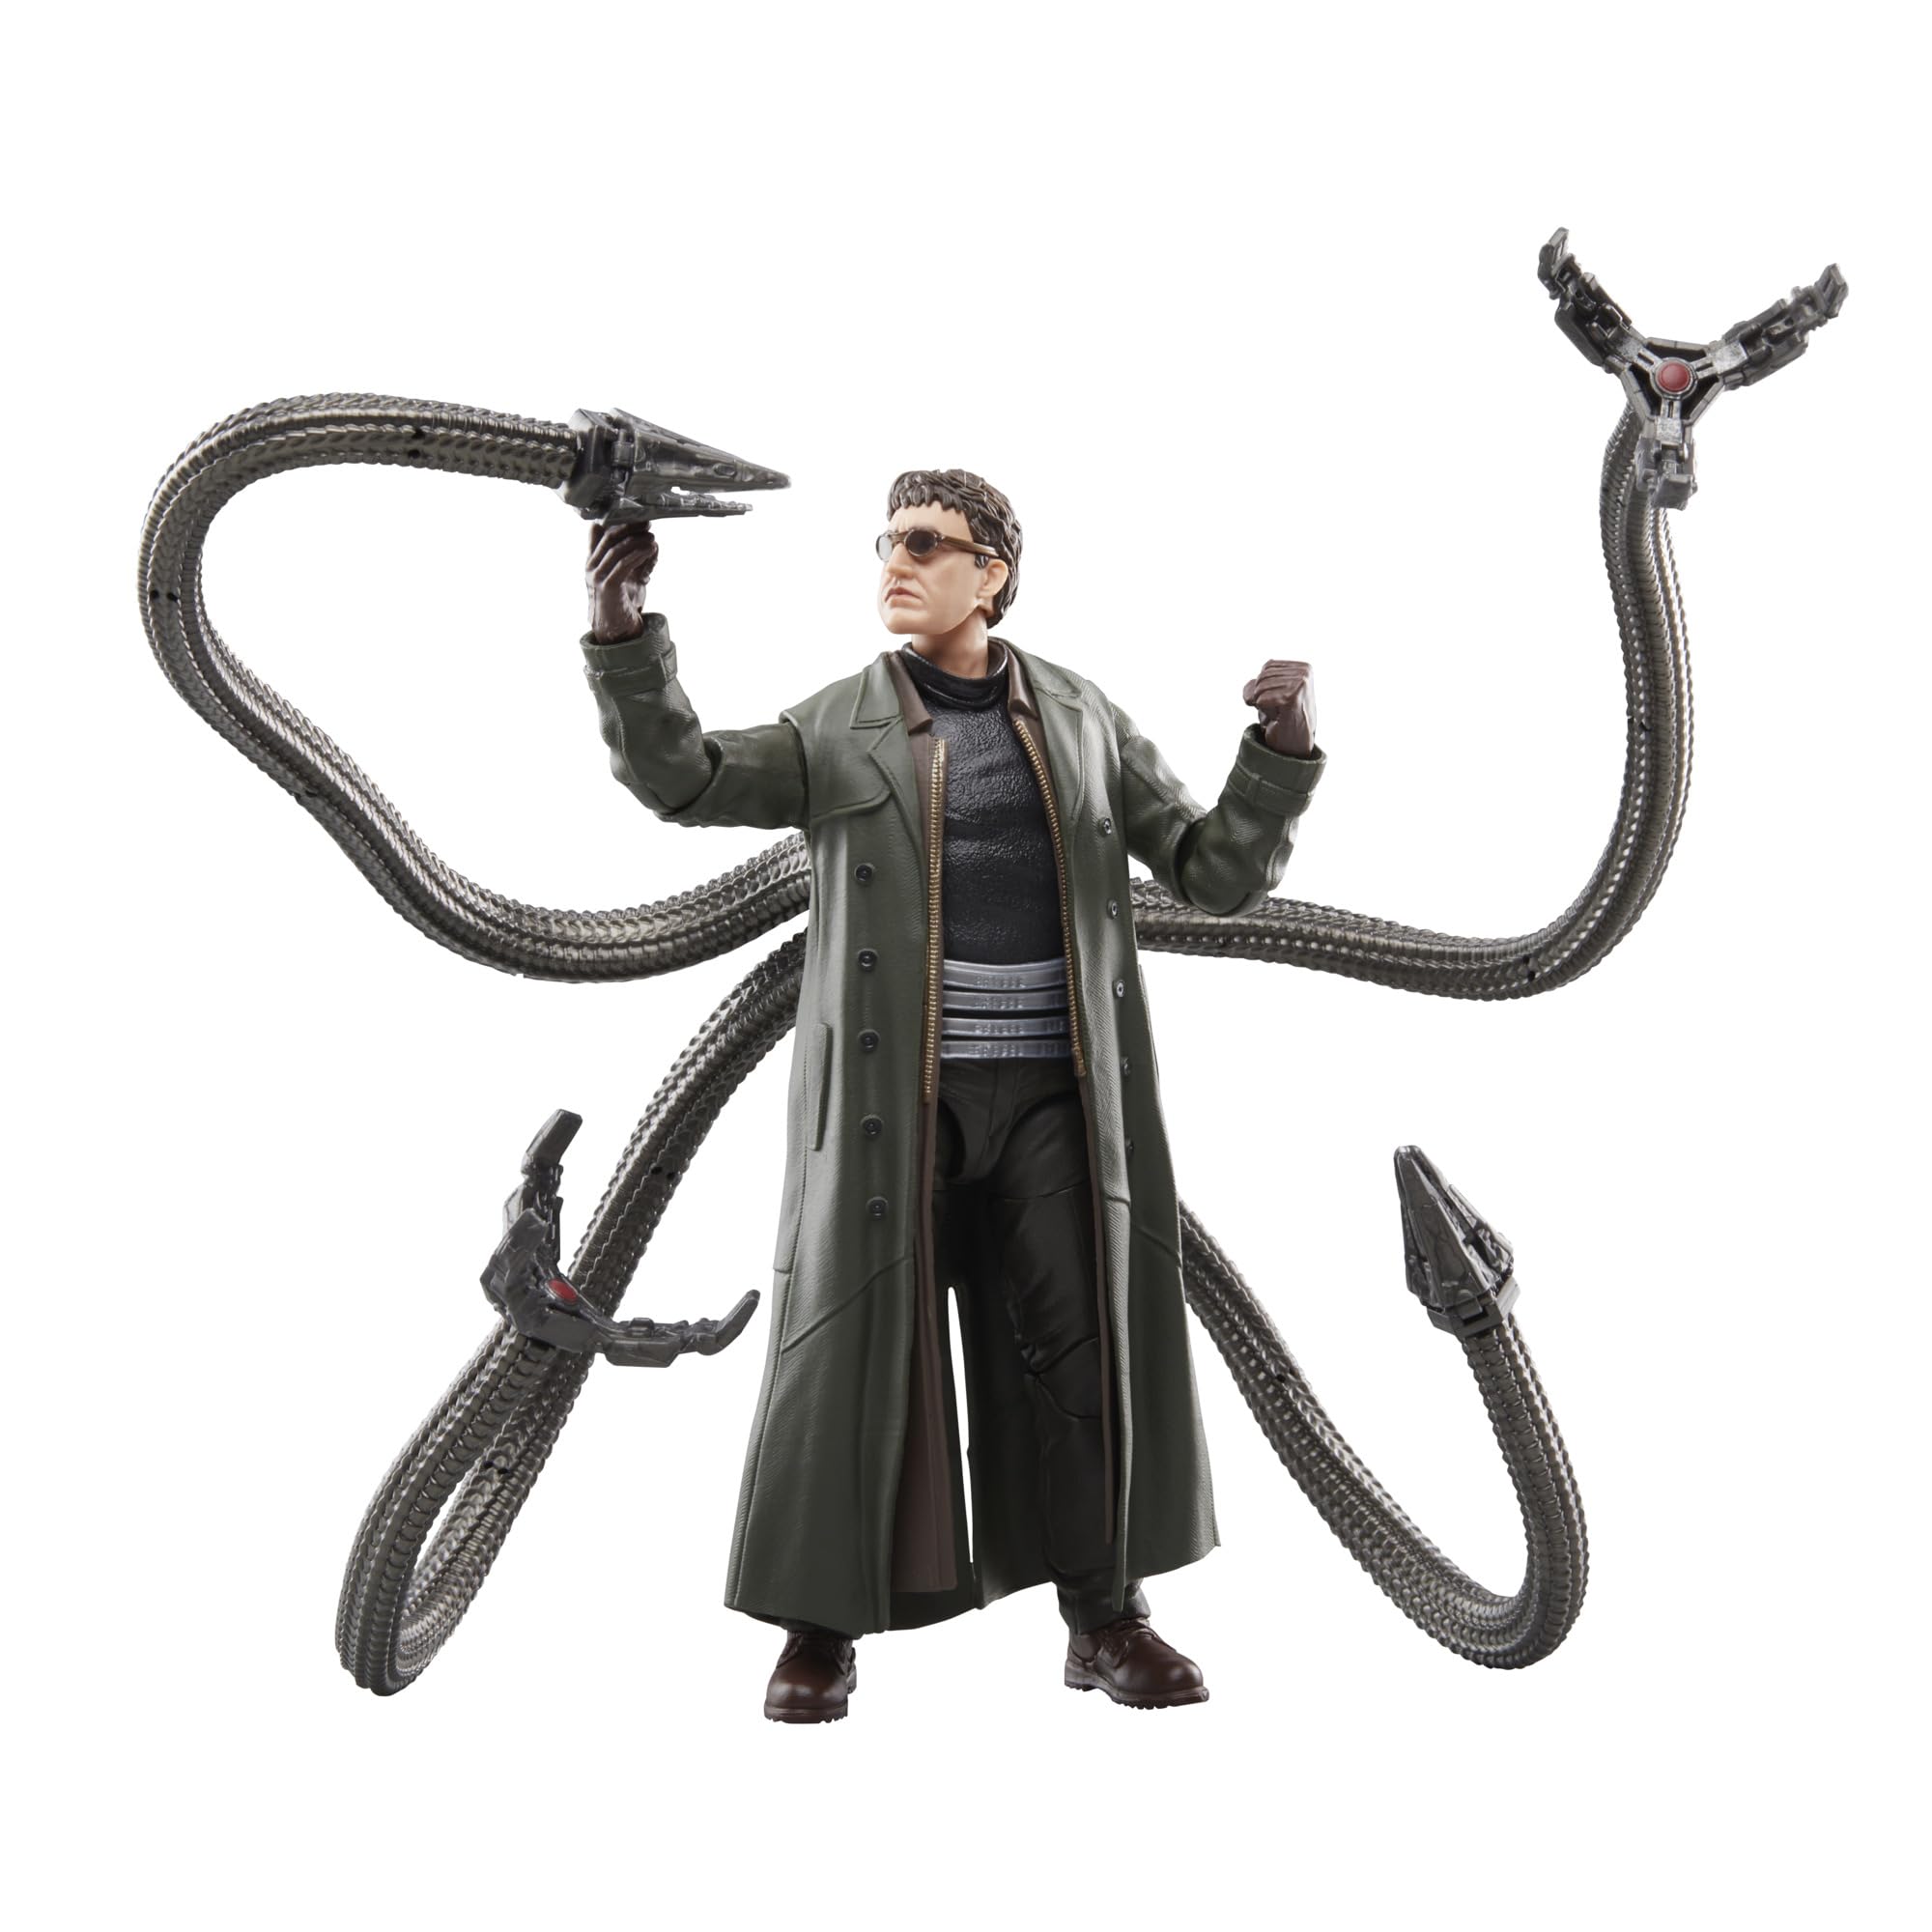 Marvel Legends Series Doc Ock, Spider-Man: No Way Home Collectible, Deluxe 6-Inch Action Figure, 4 Accessories, Ages 4 and Up 